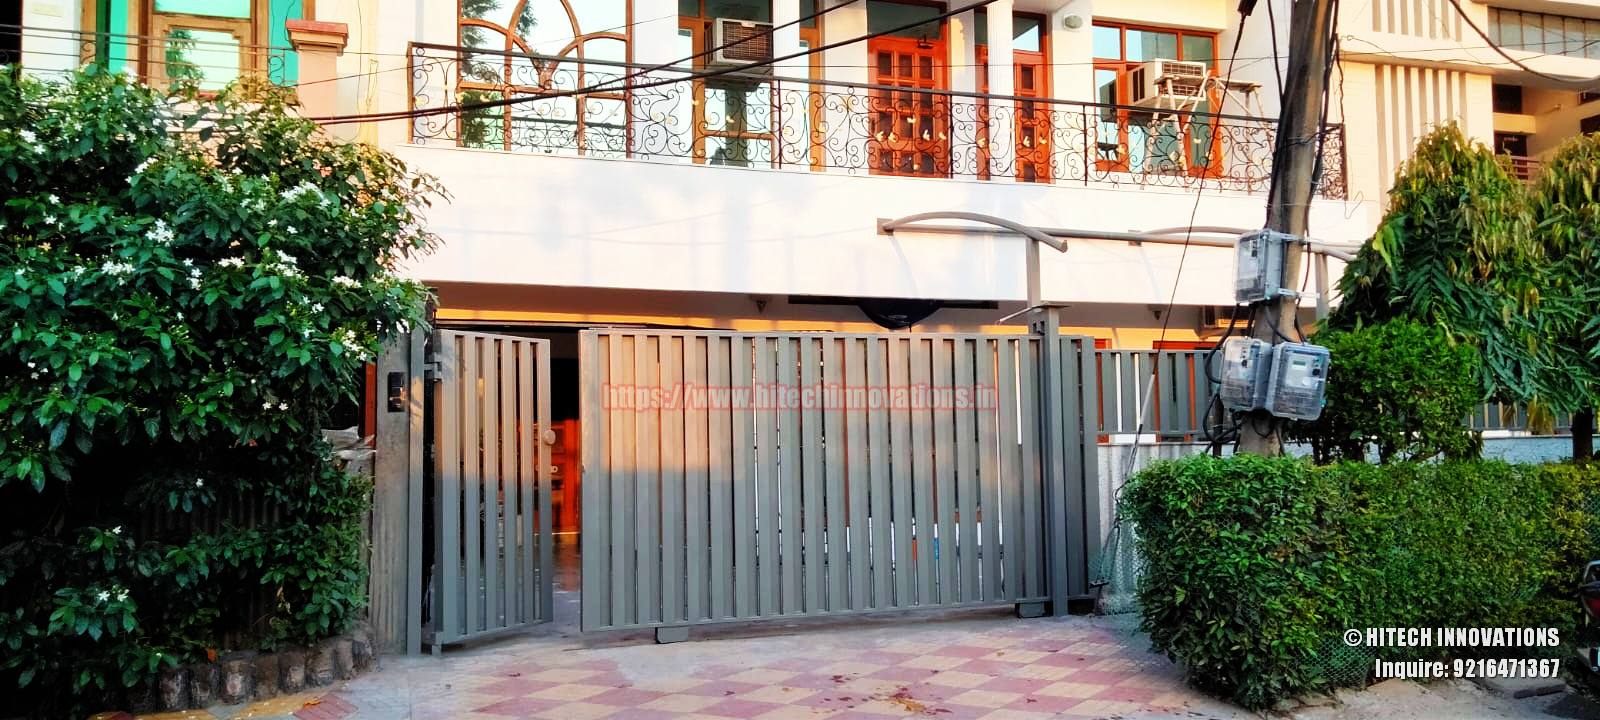 Completed Installing Sliding Gate in Panchkula